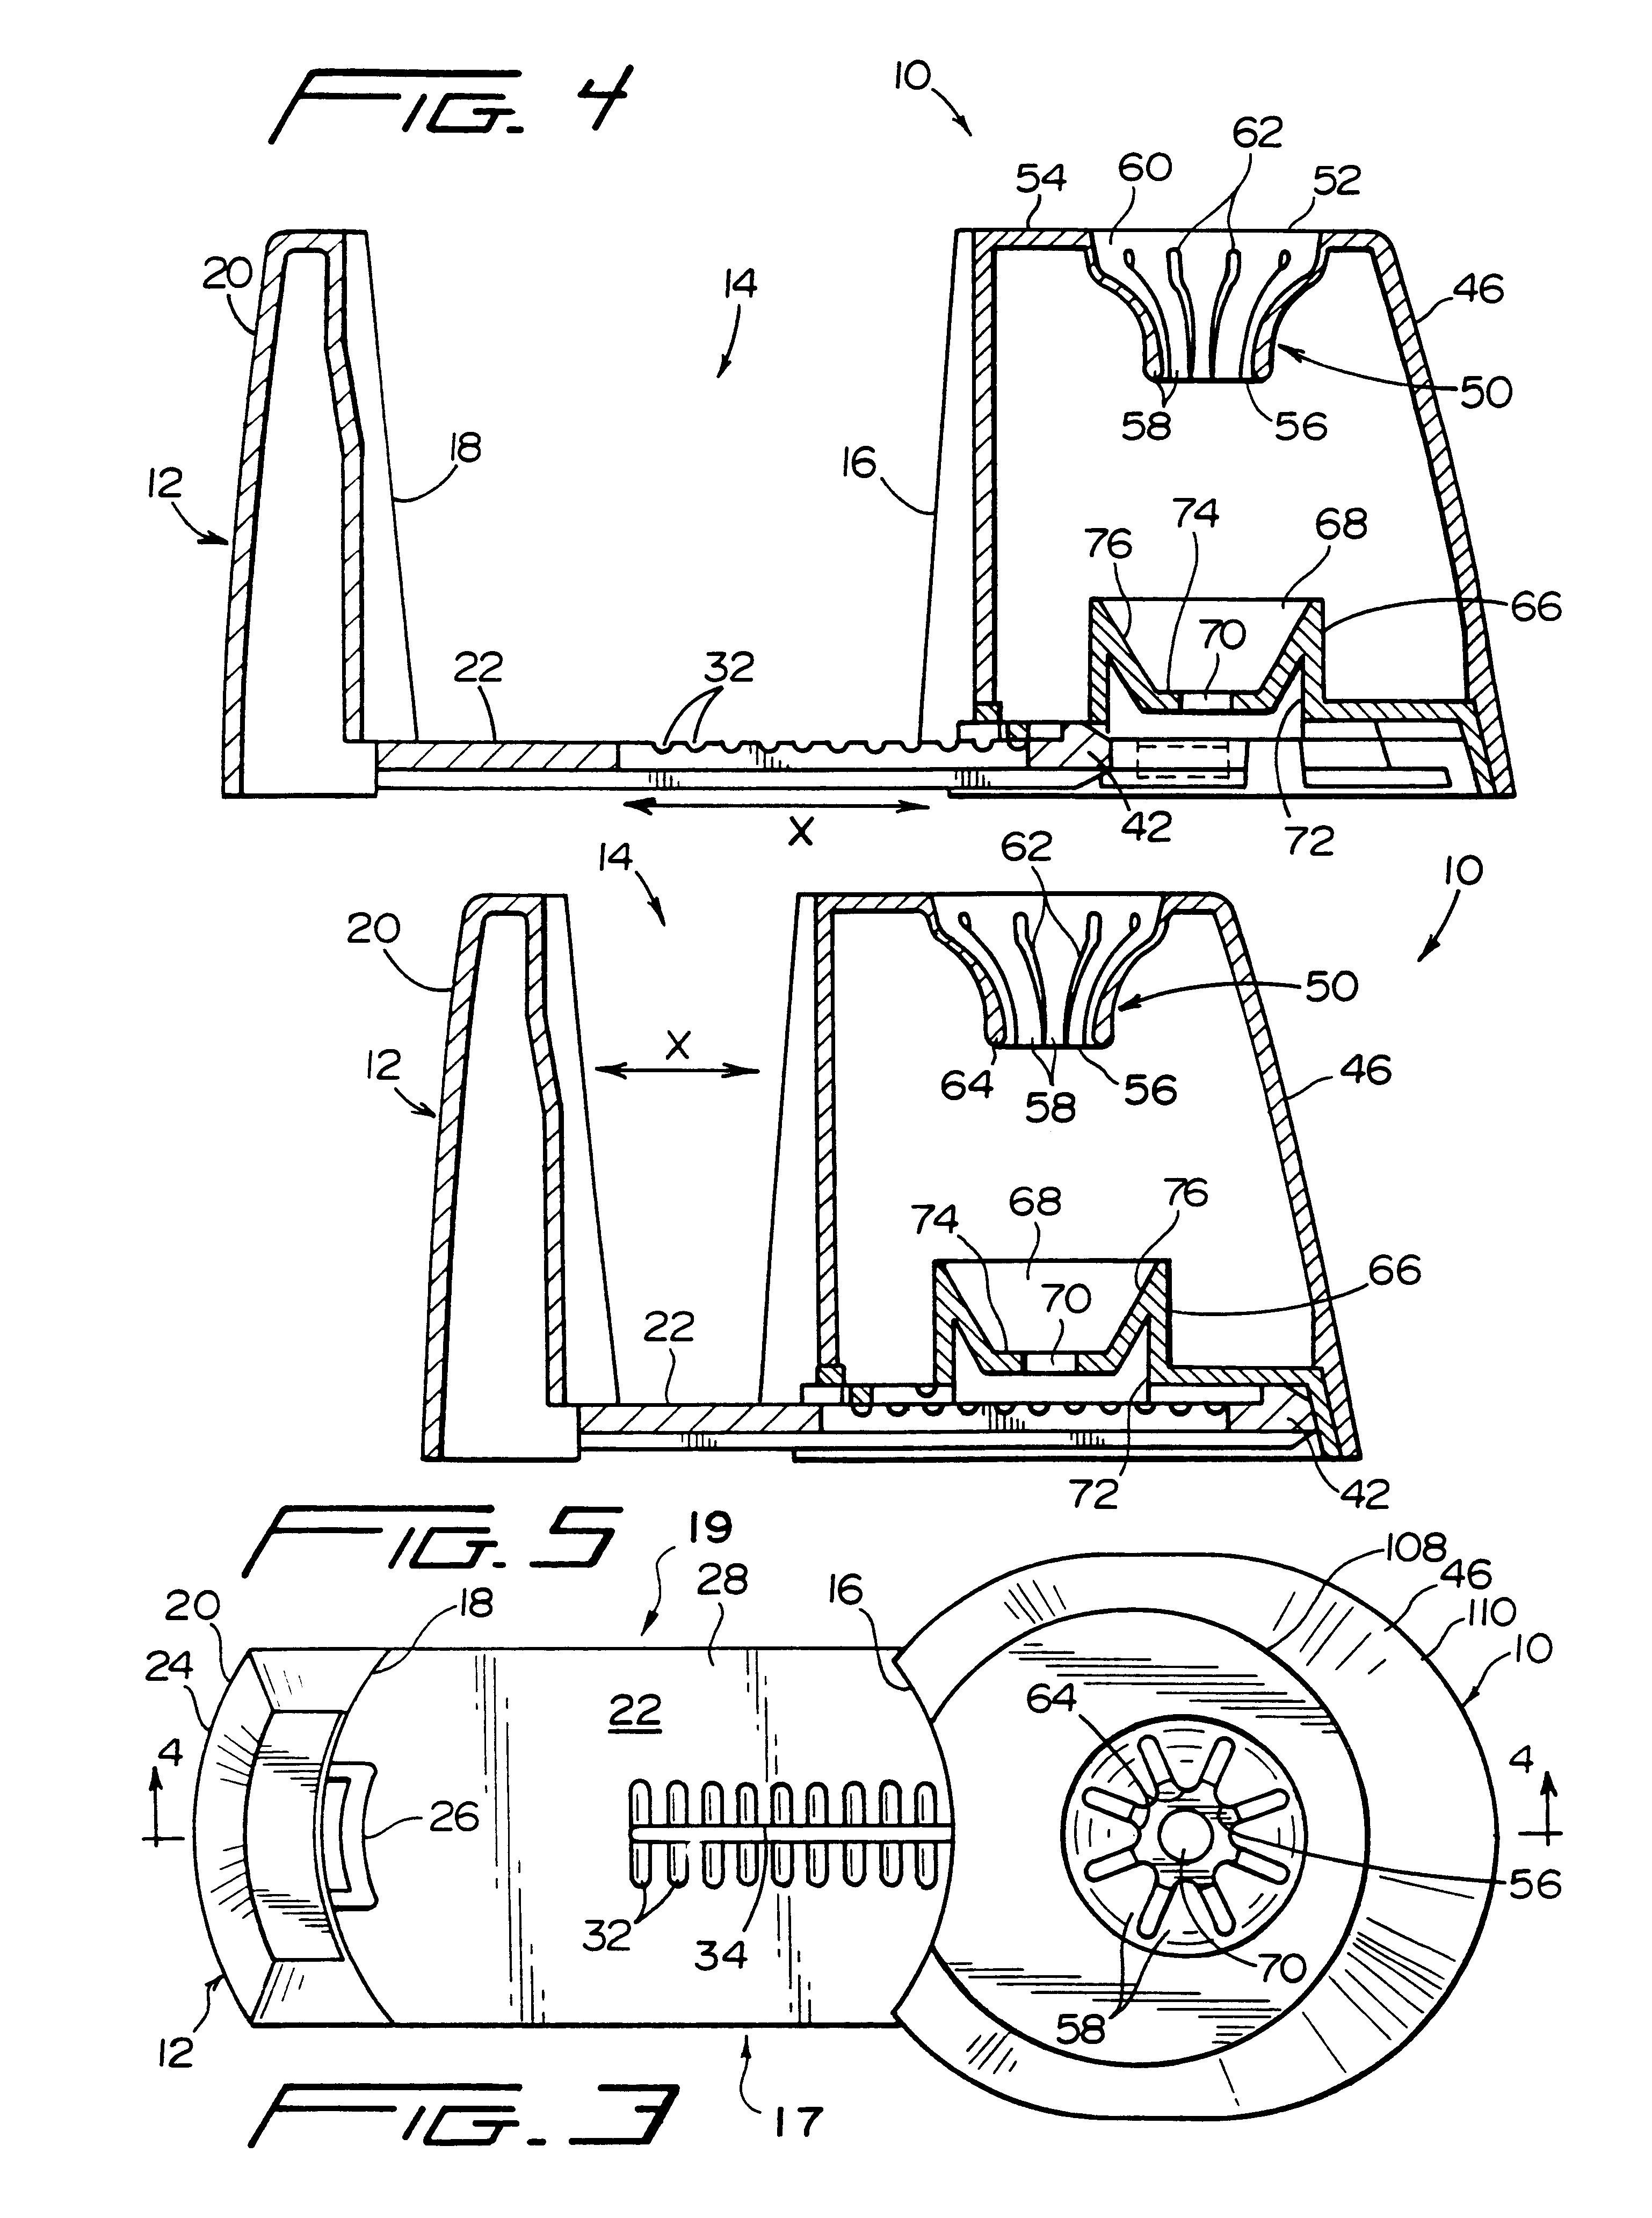 Adjustable health improvement device for modifying a daily behavior by reminding a person to take medication